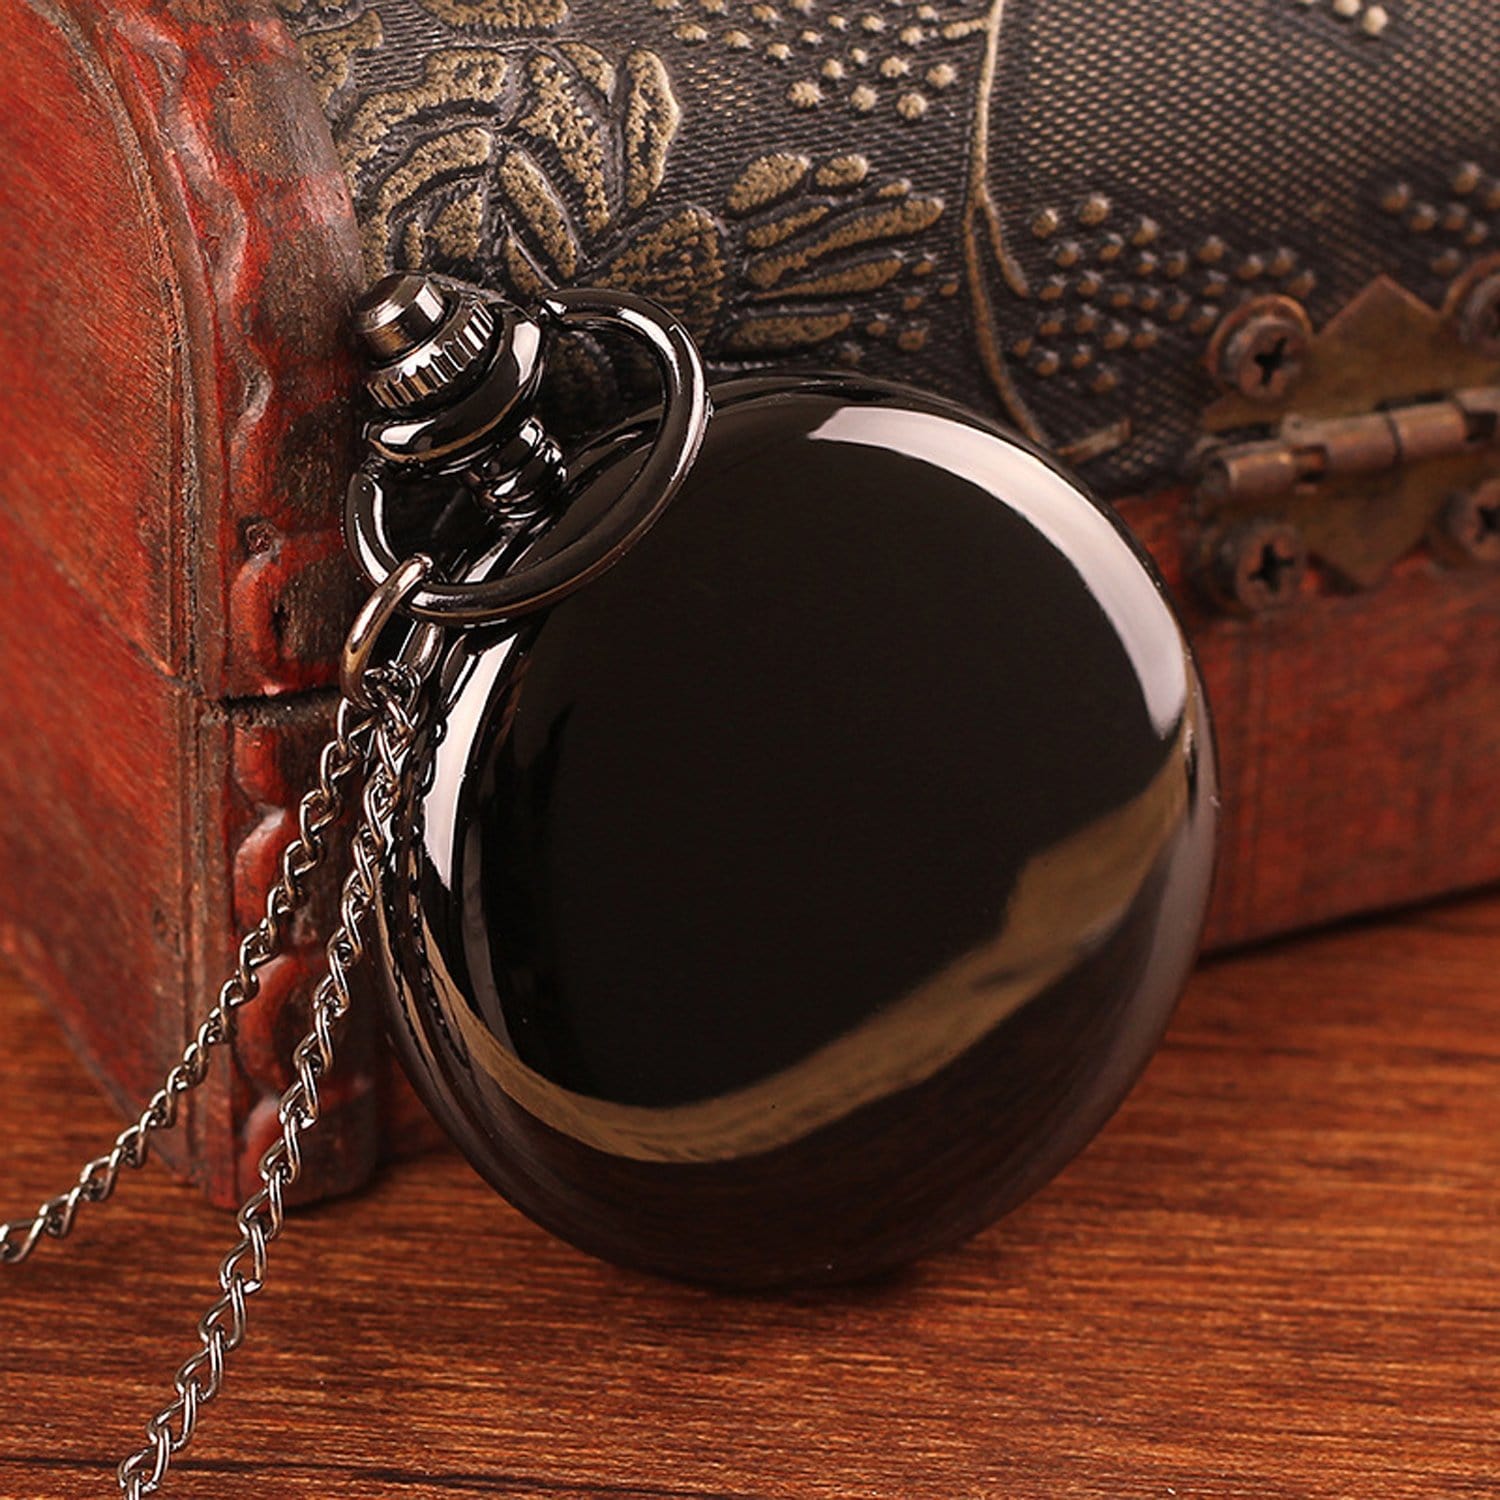 Pocket Watches For Lovers To My Boyfriend - I Give You My Love Unconditionally Pocket Watch GiveMe-Gifts